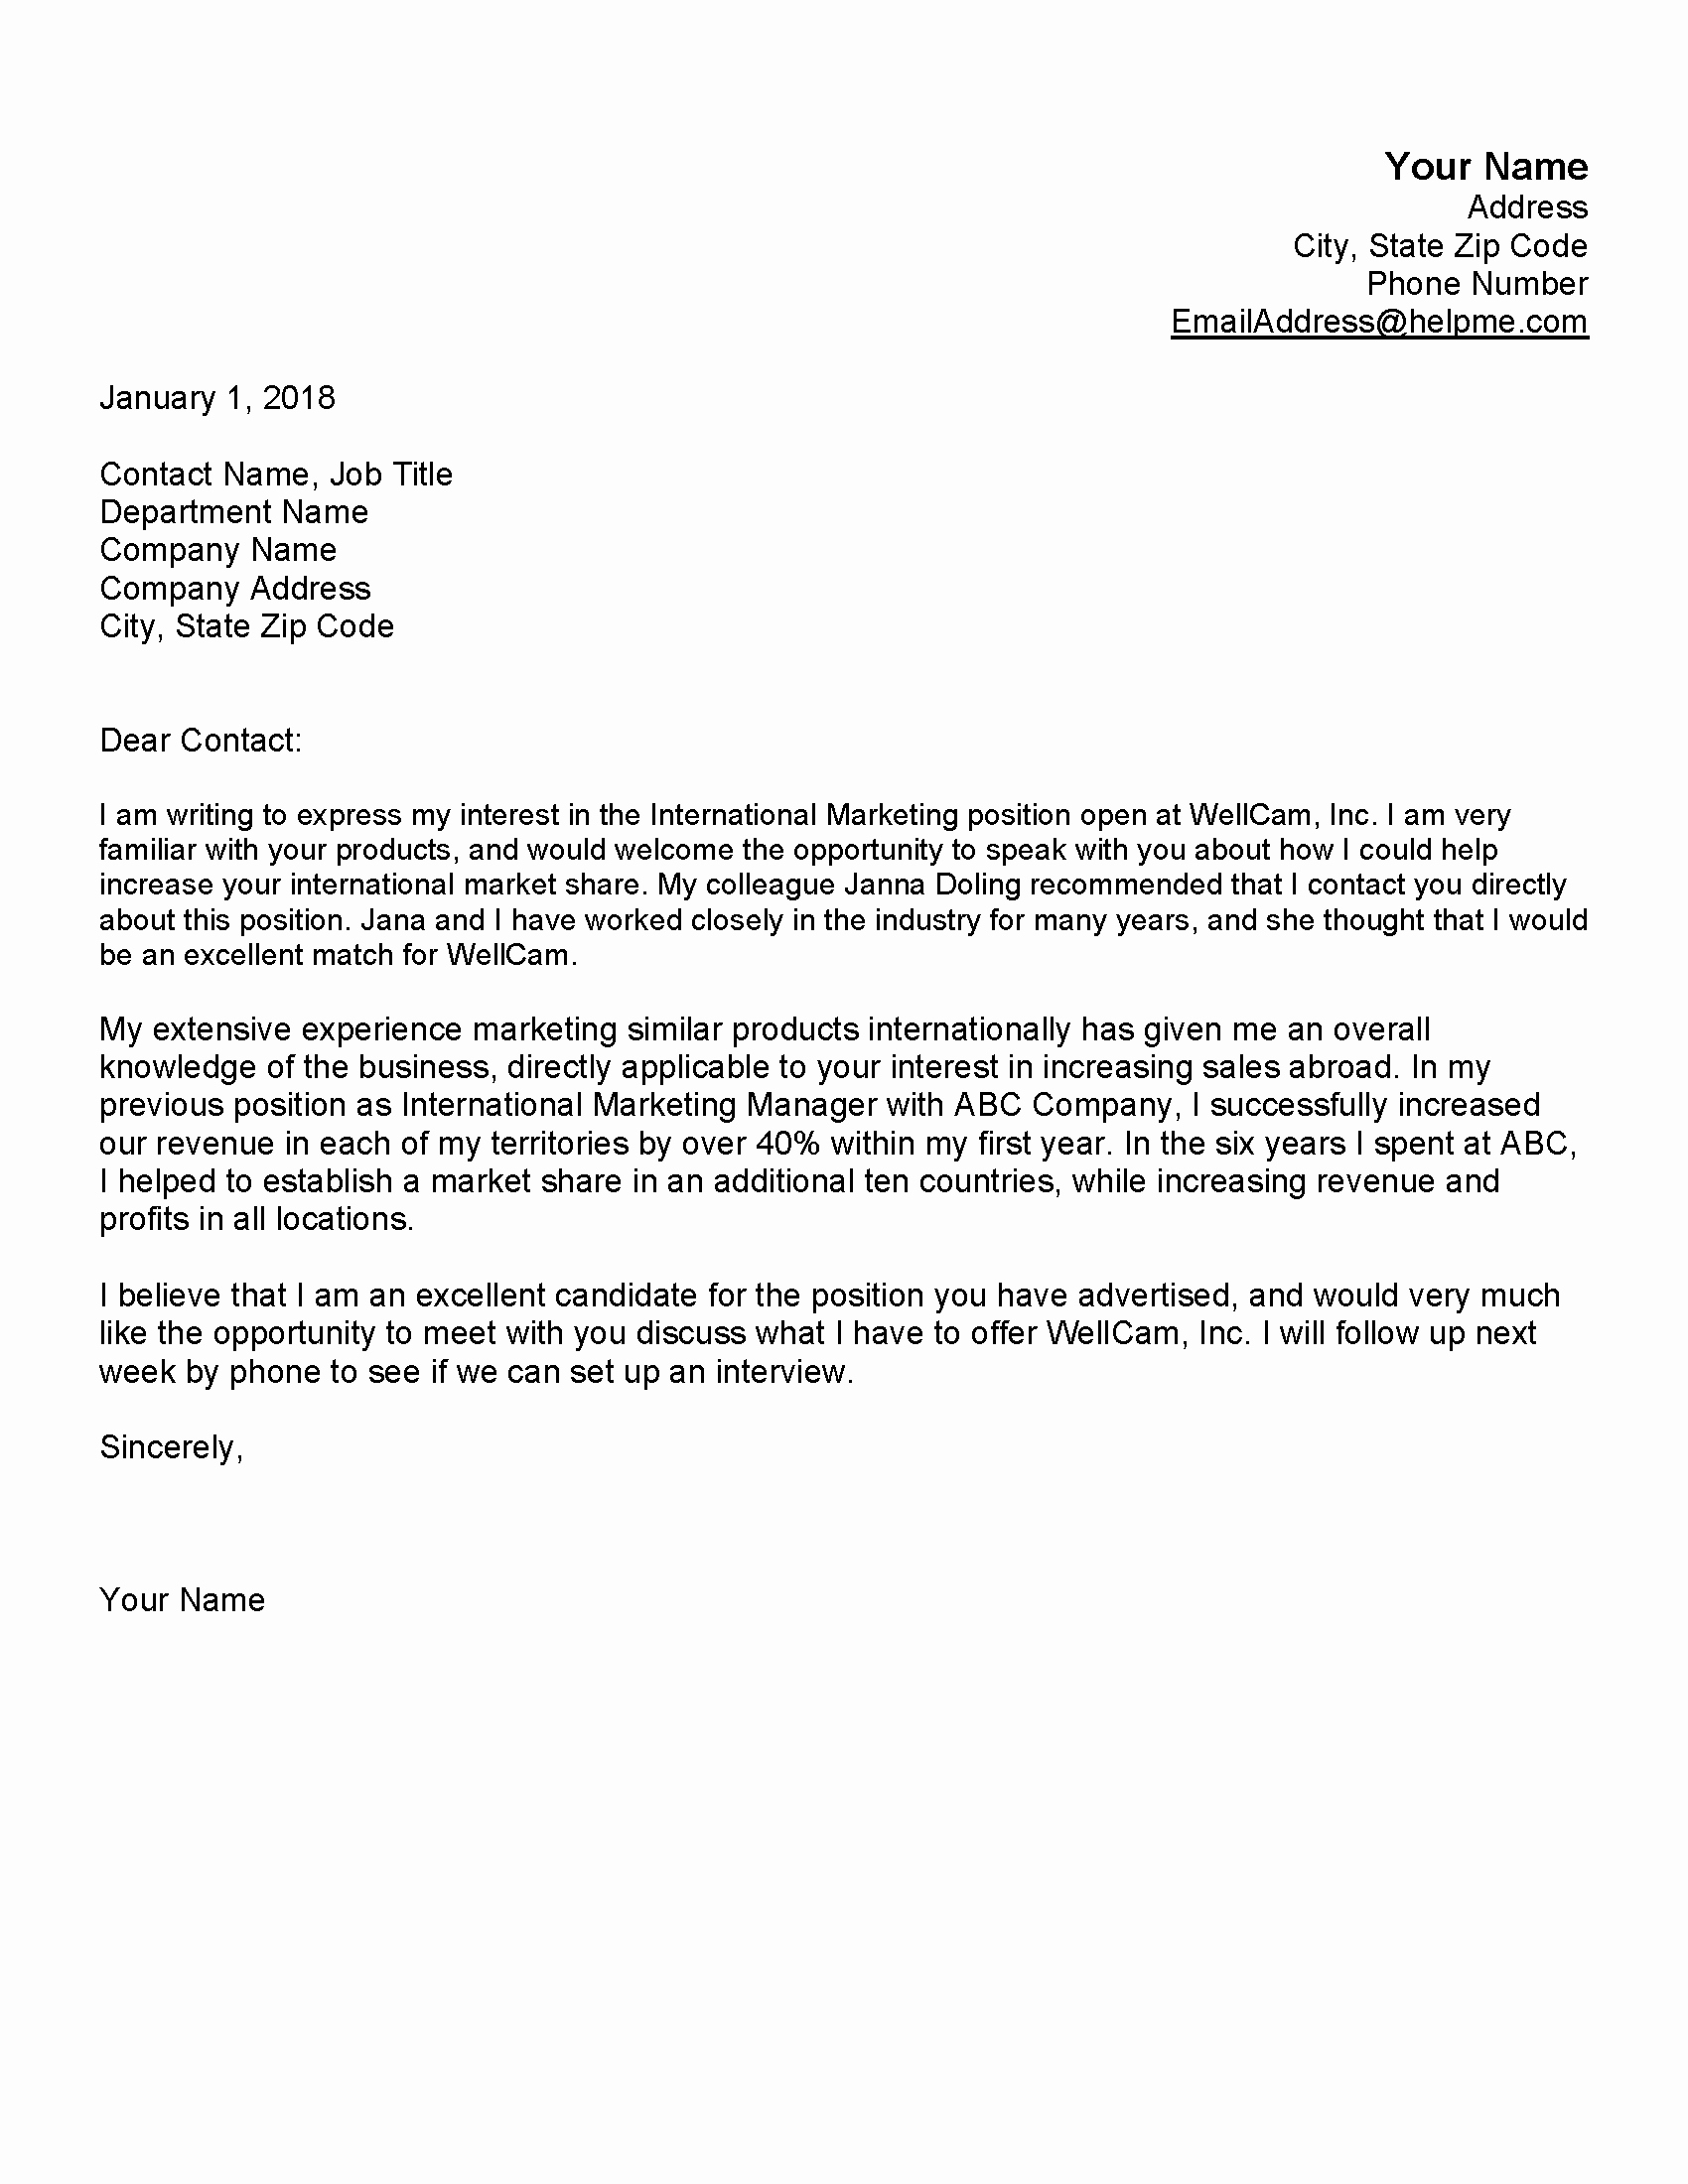 Cover Letter Examples for Students Best Of Cover Letter Samples